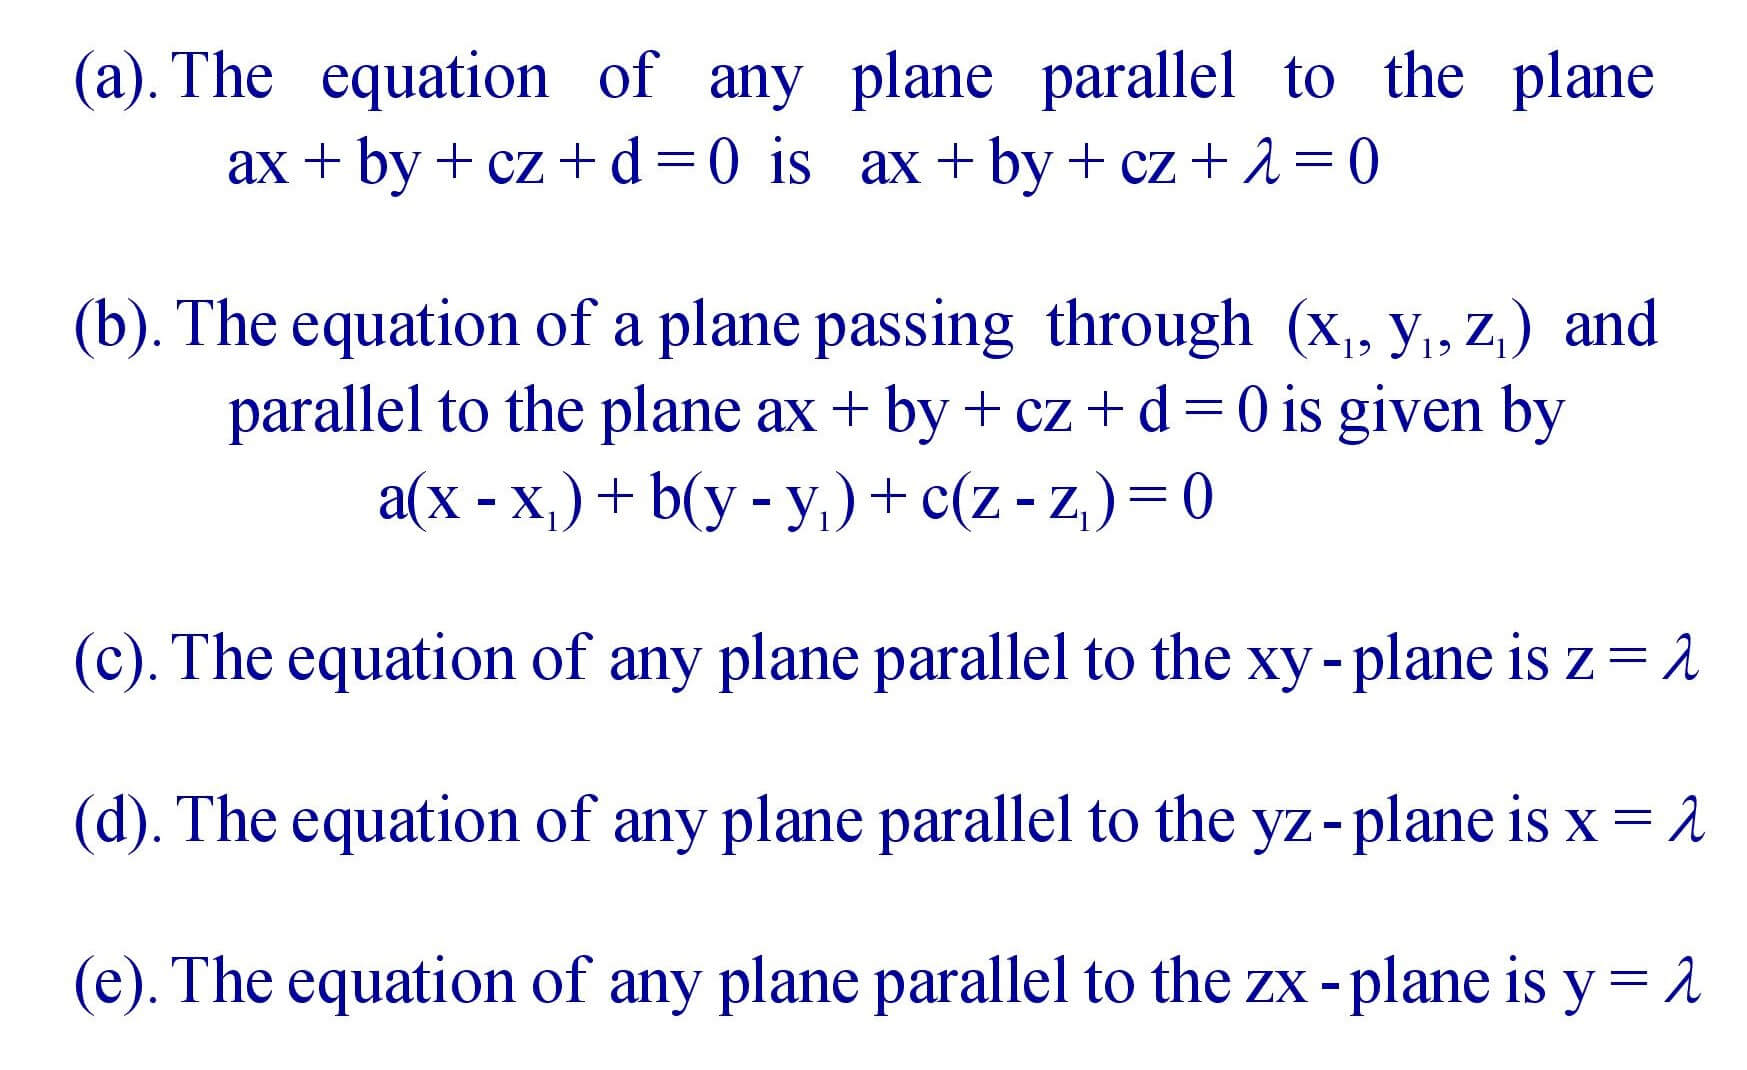 If given two planes parallel to each other.